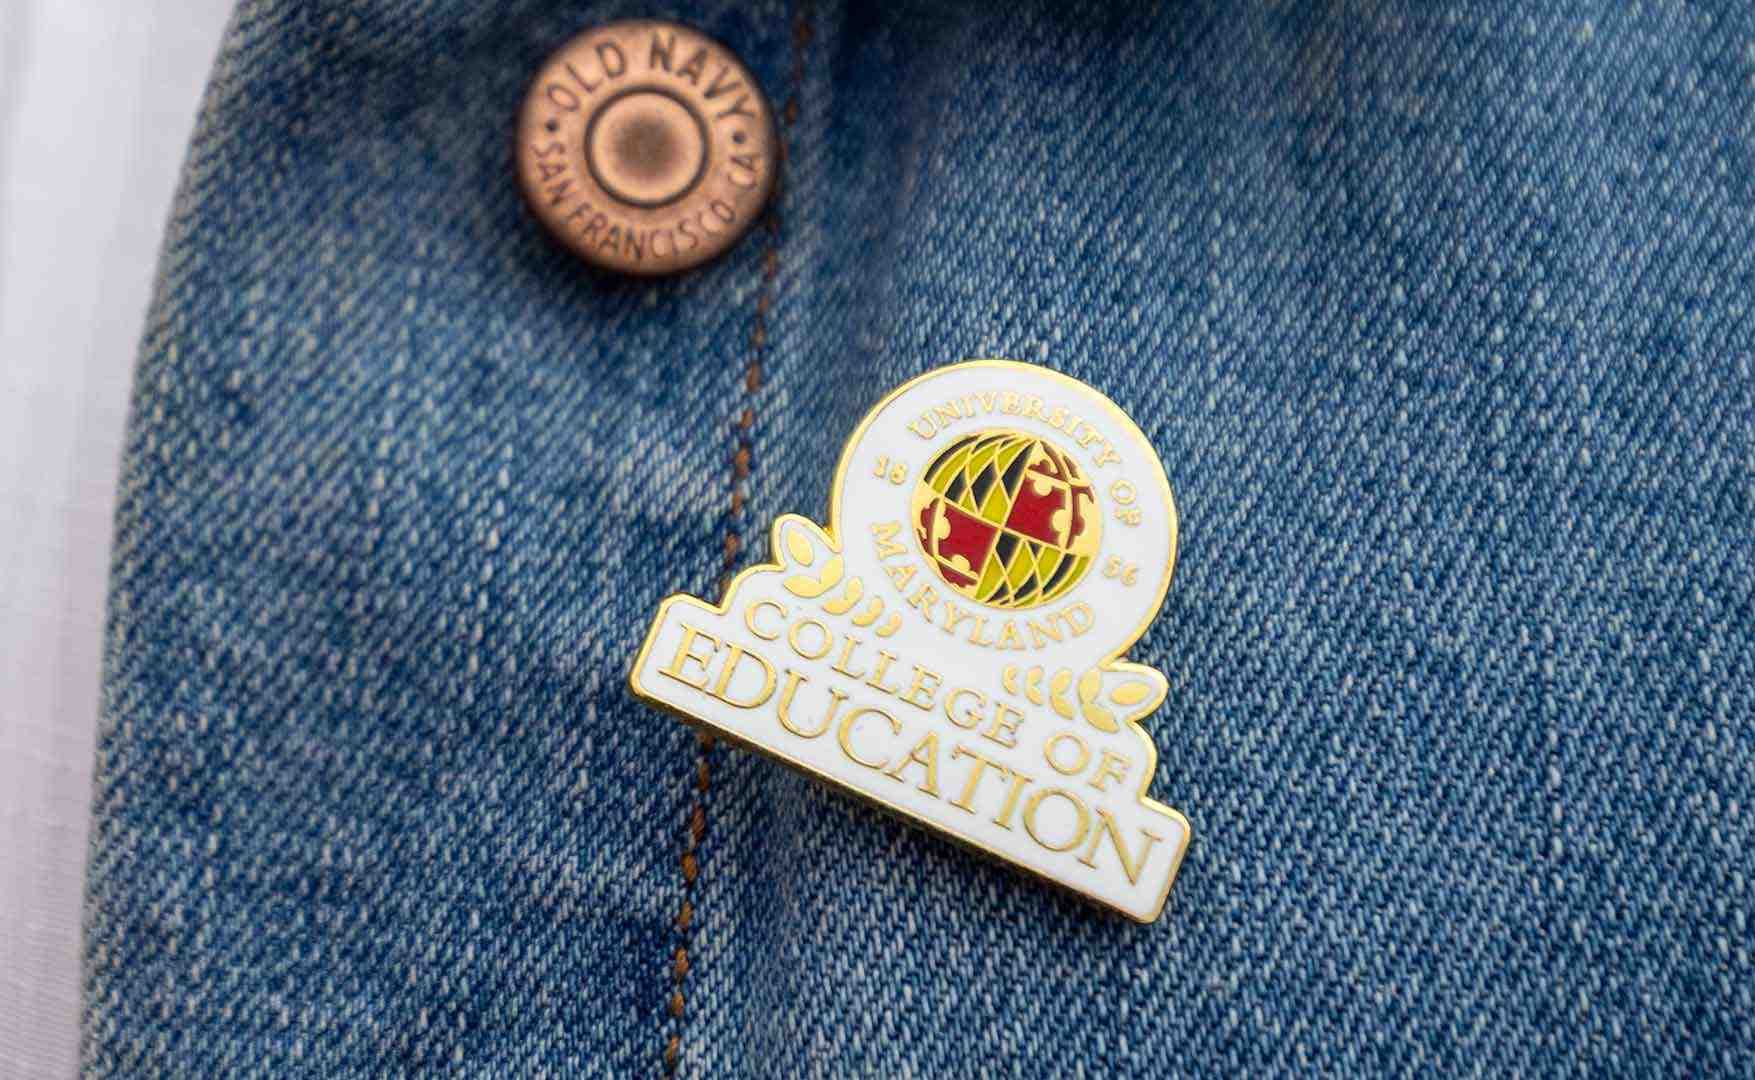 A pin that featured a globe and says University of Maryland College of Education, pinned on jean material